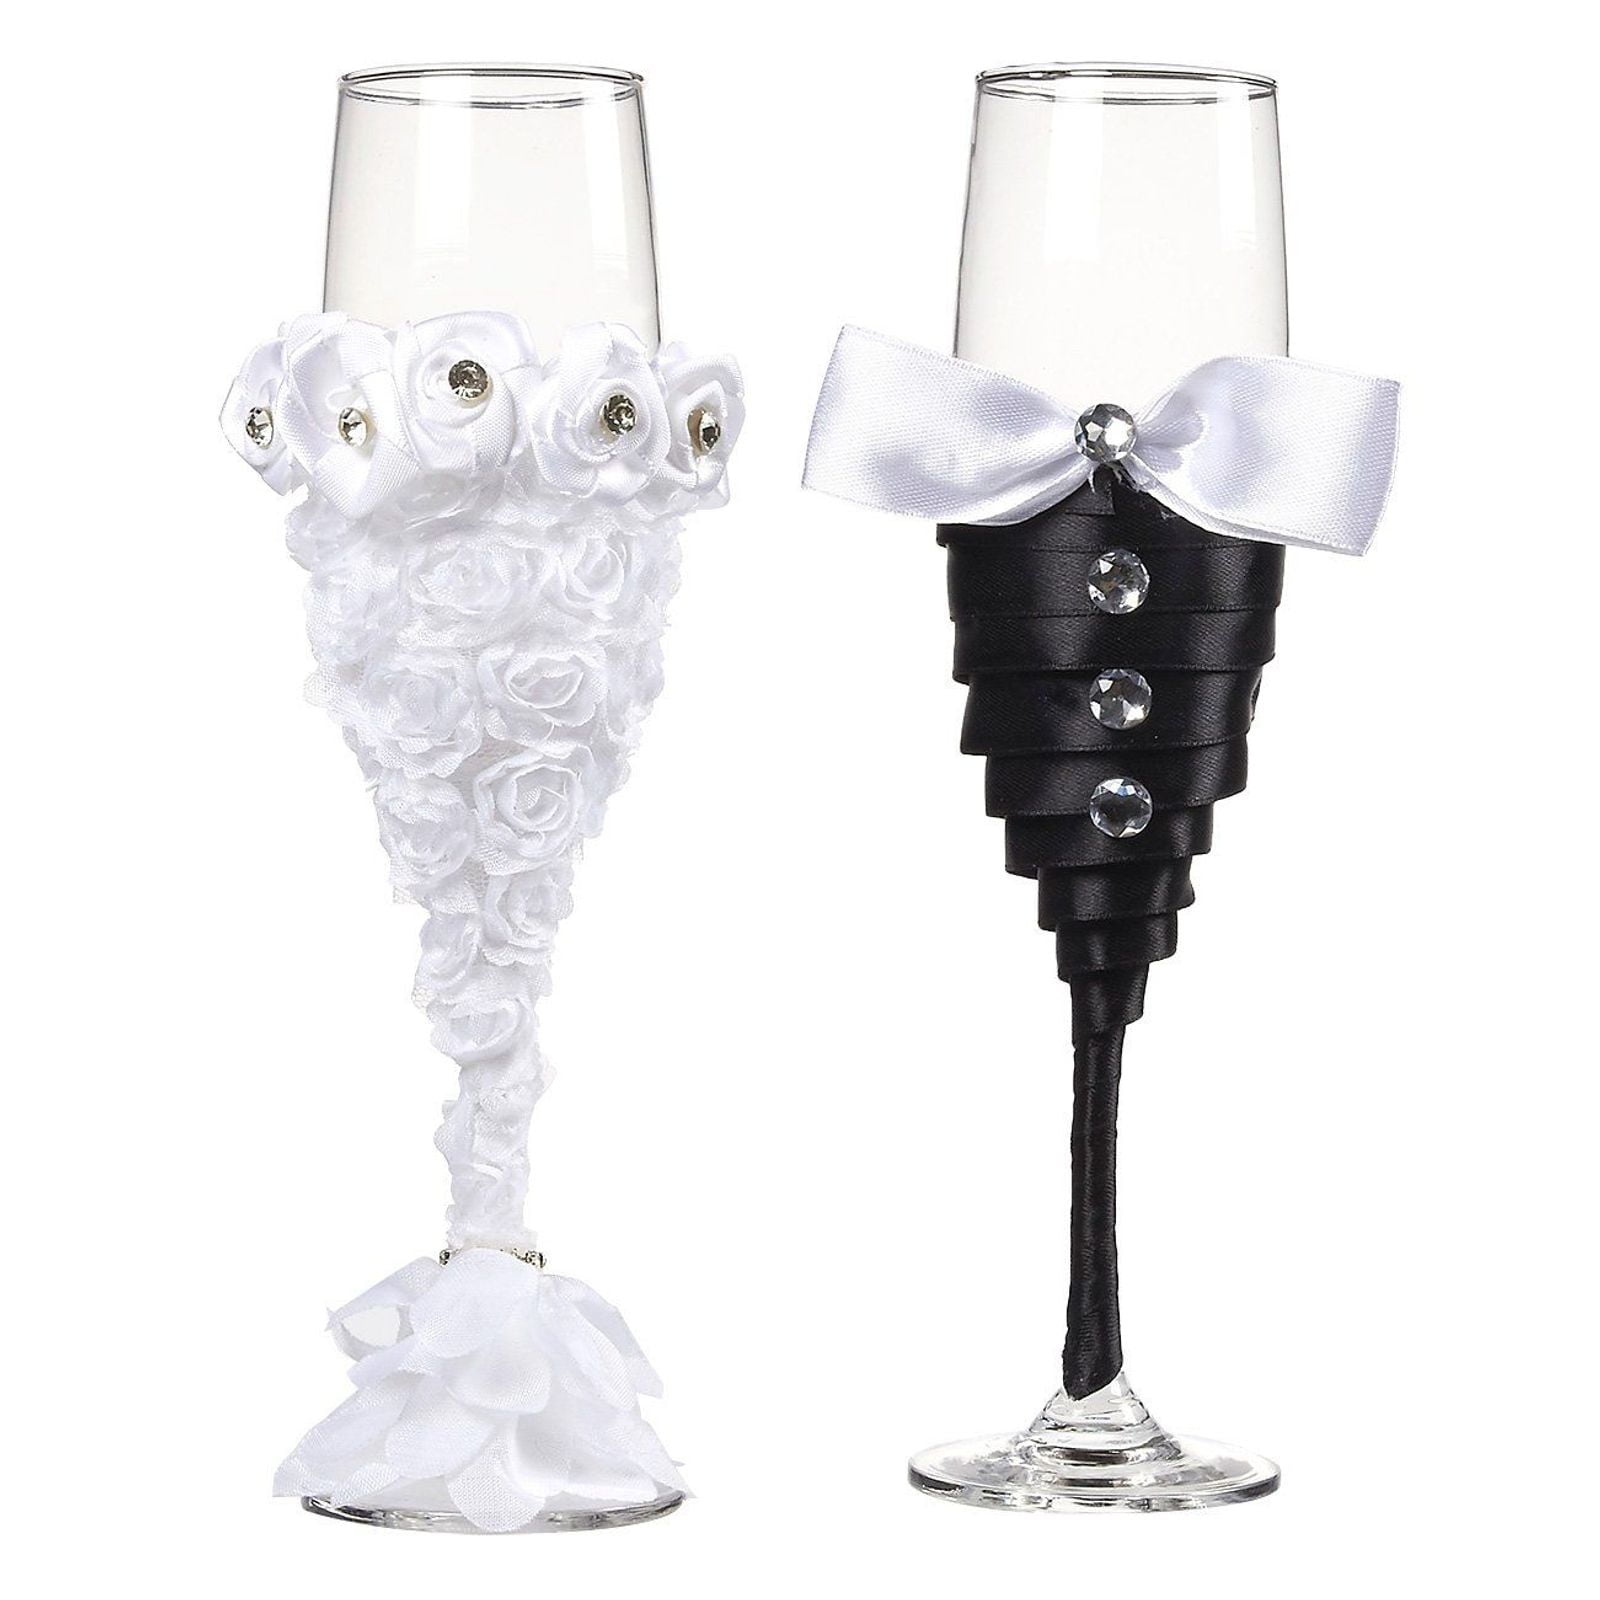 Personalized Wedding Toasting Flutes Champagne Glasses Sets Bride&Groom Pair 